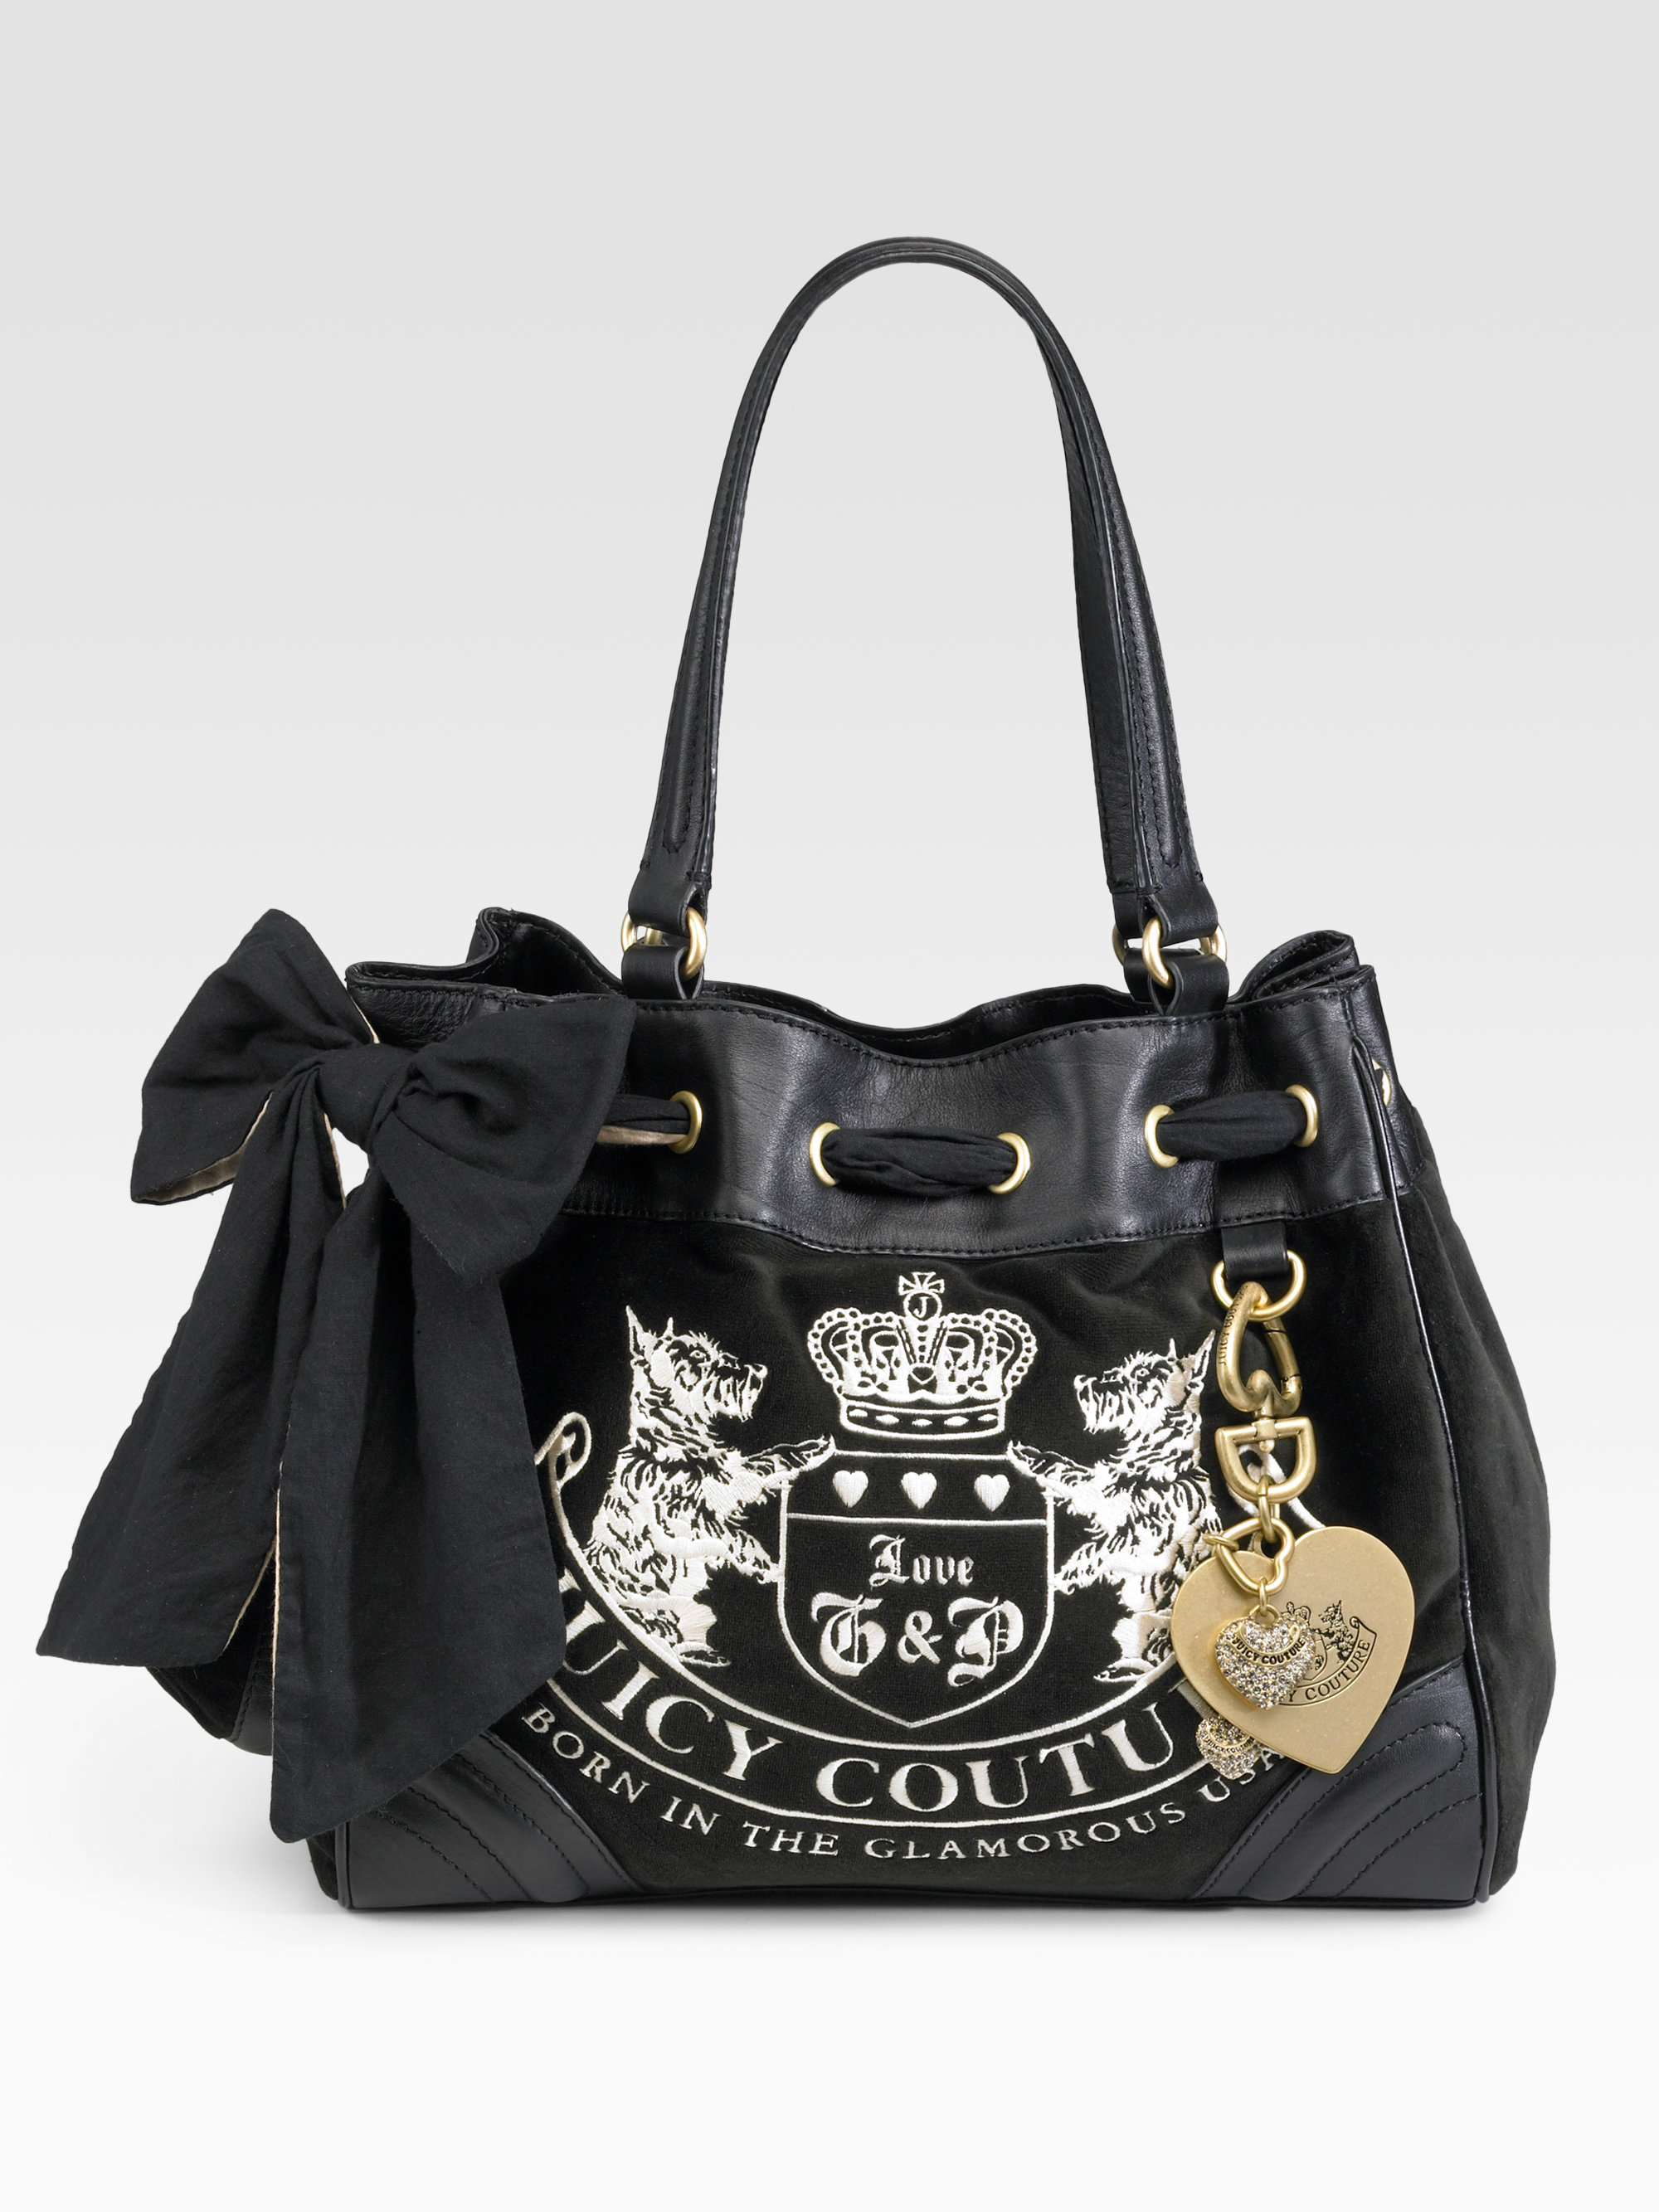 Juicy Couture Purse